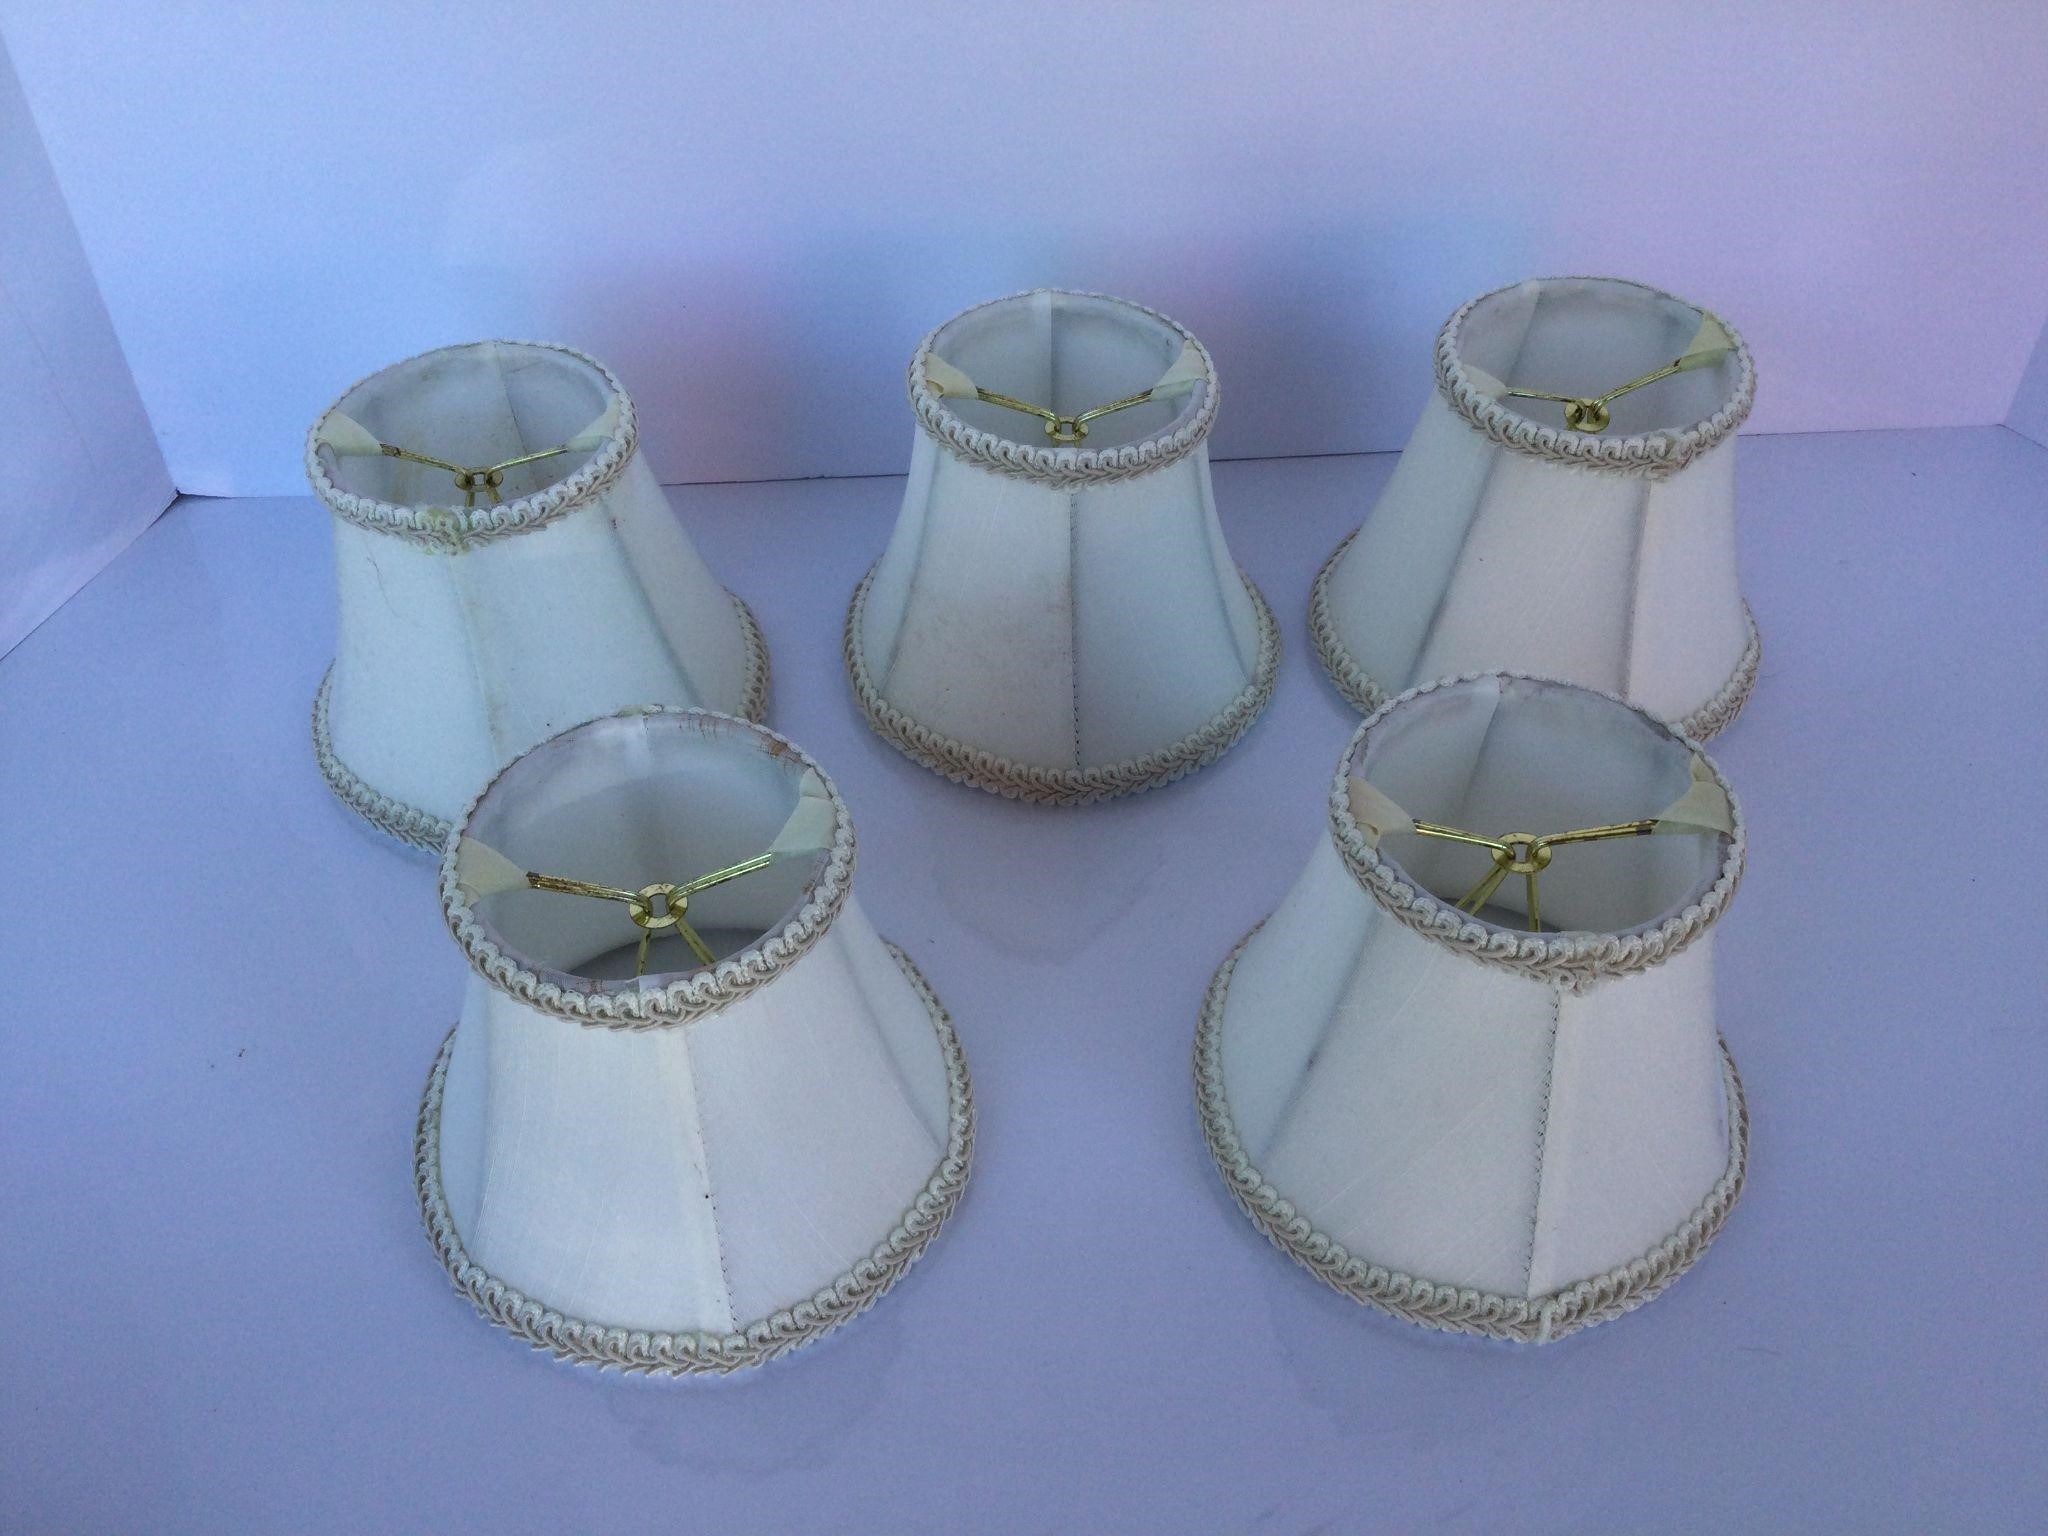 Lot of 5 Chandelier Shades Some Stains